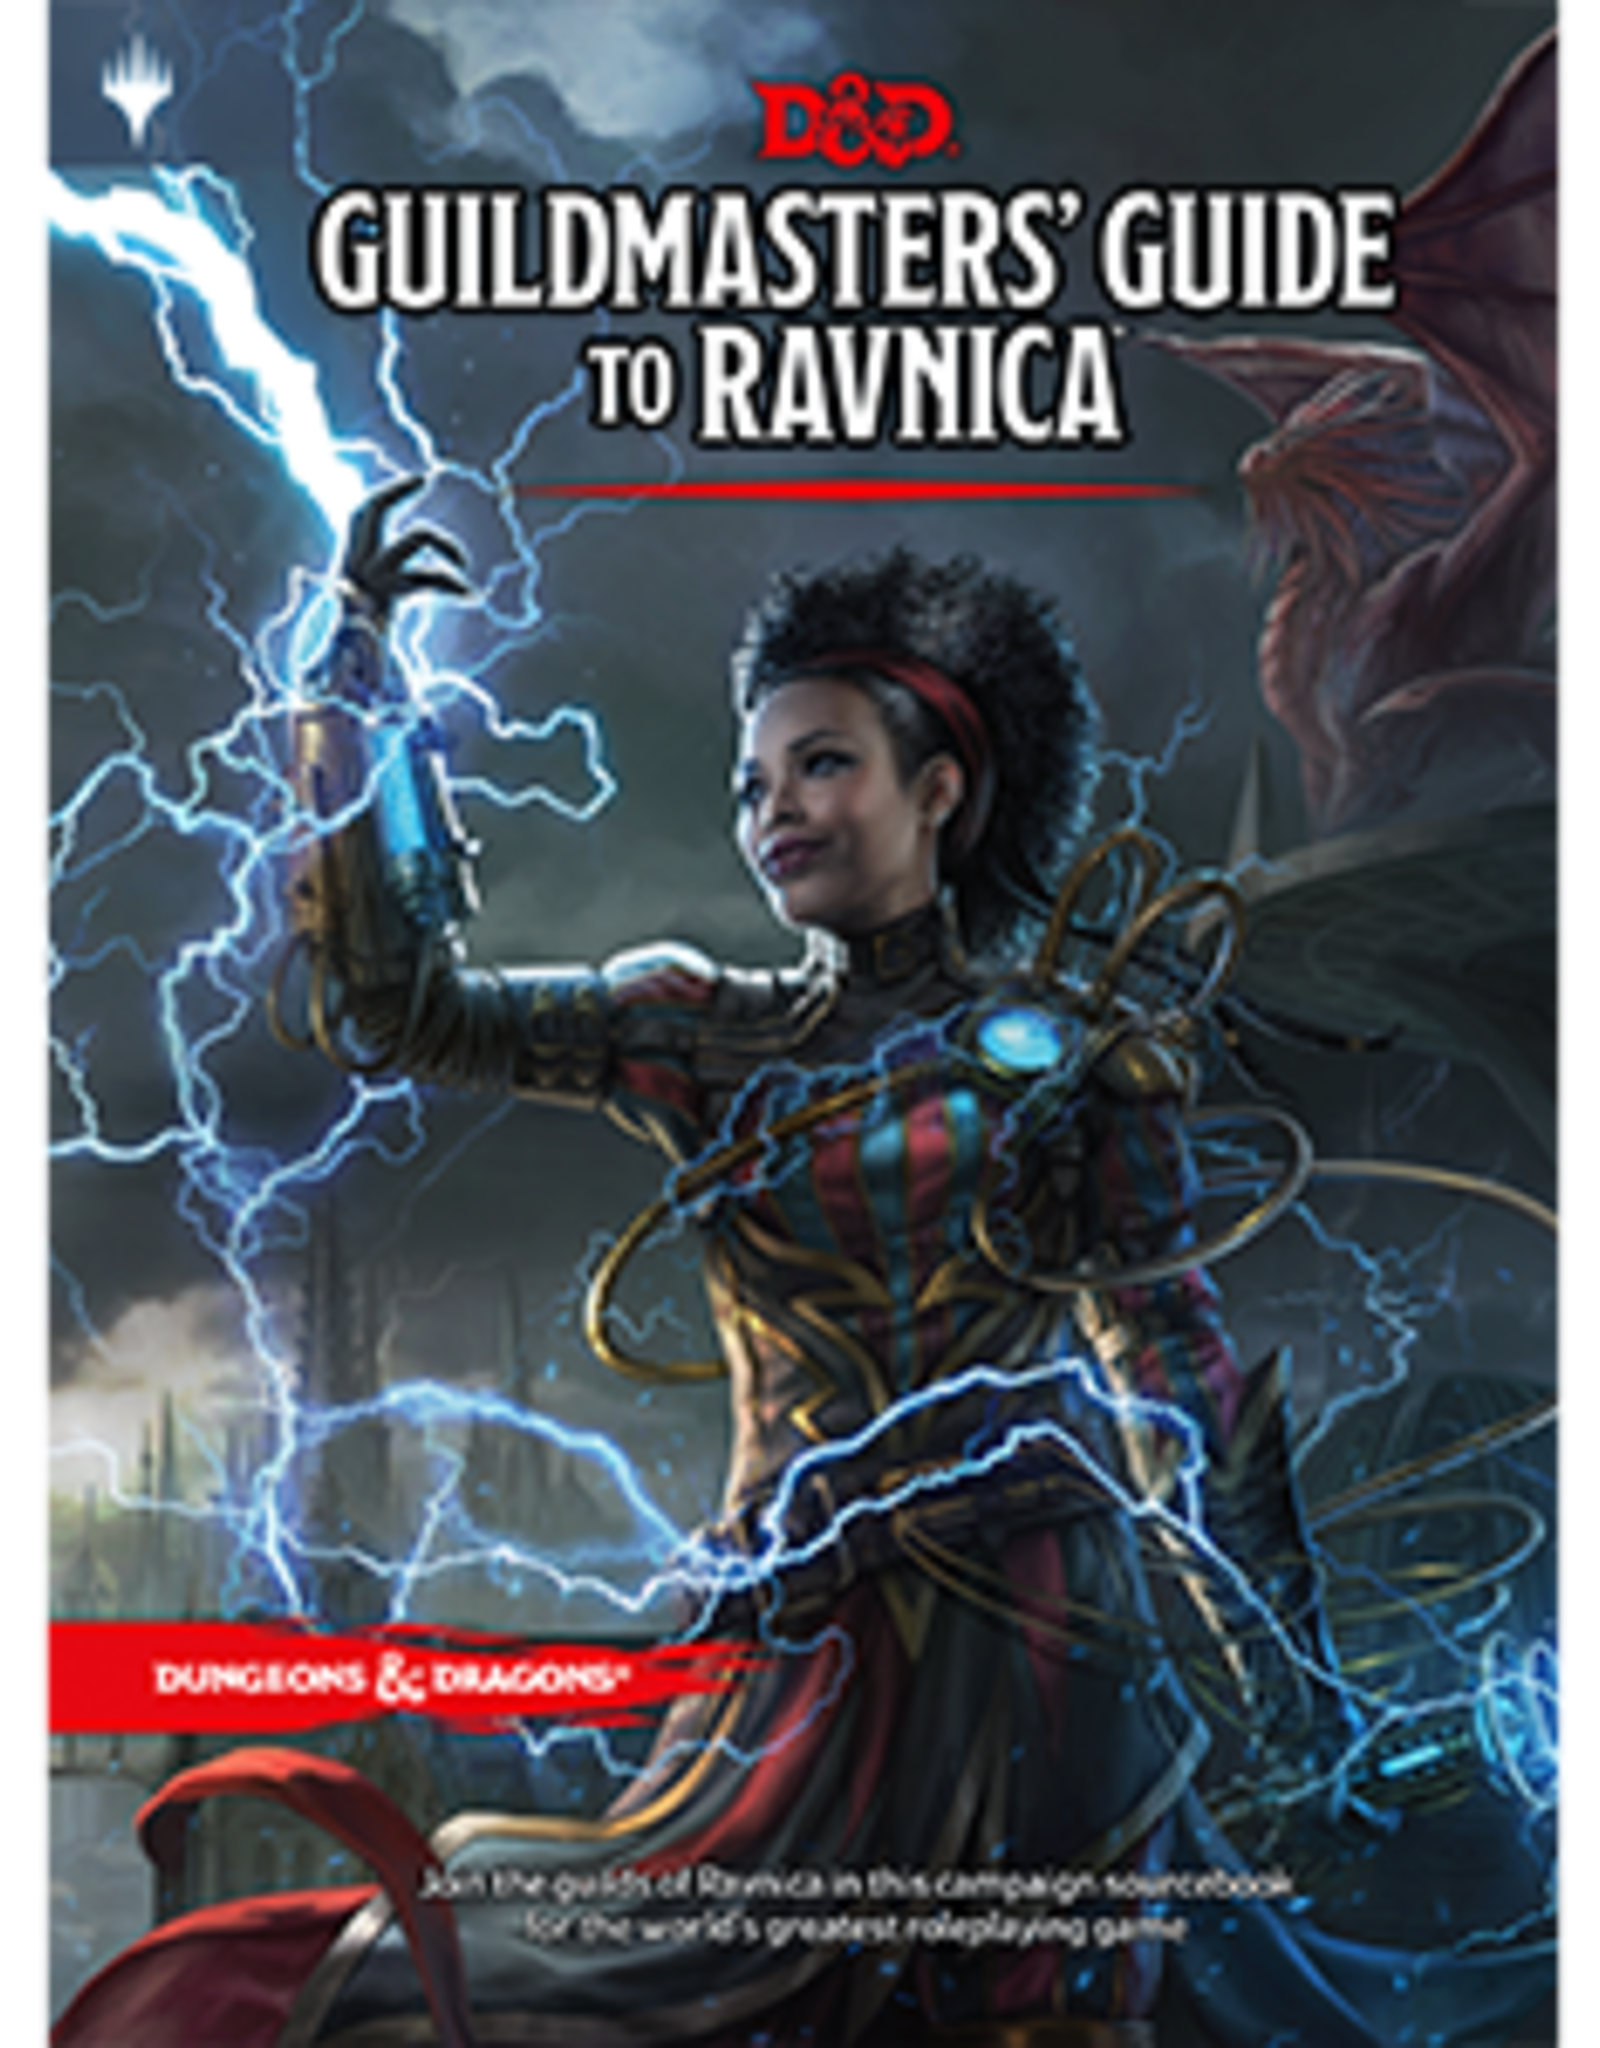 Wizards of the Coast D&D Guildmaster's Guide to Ravnica